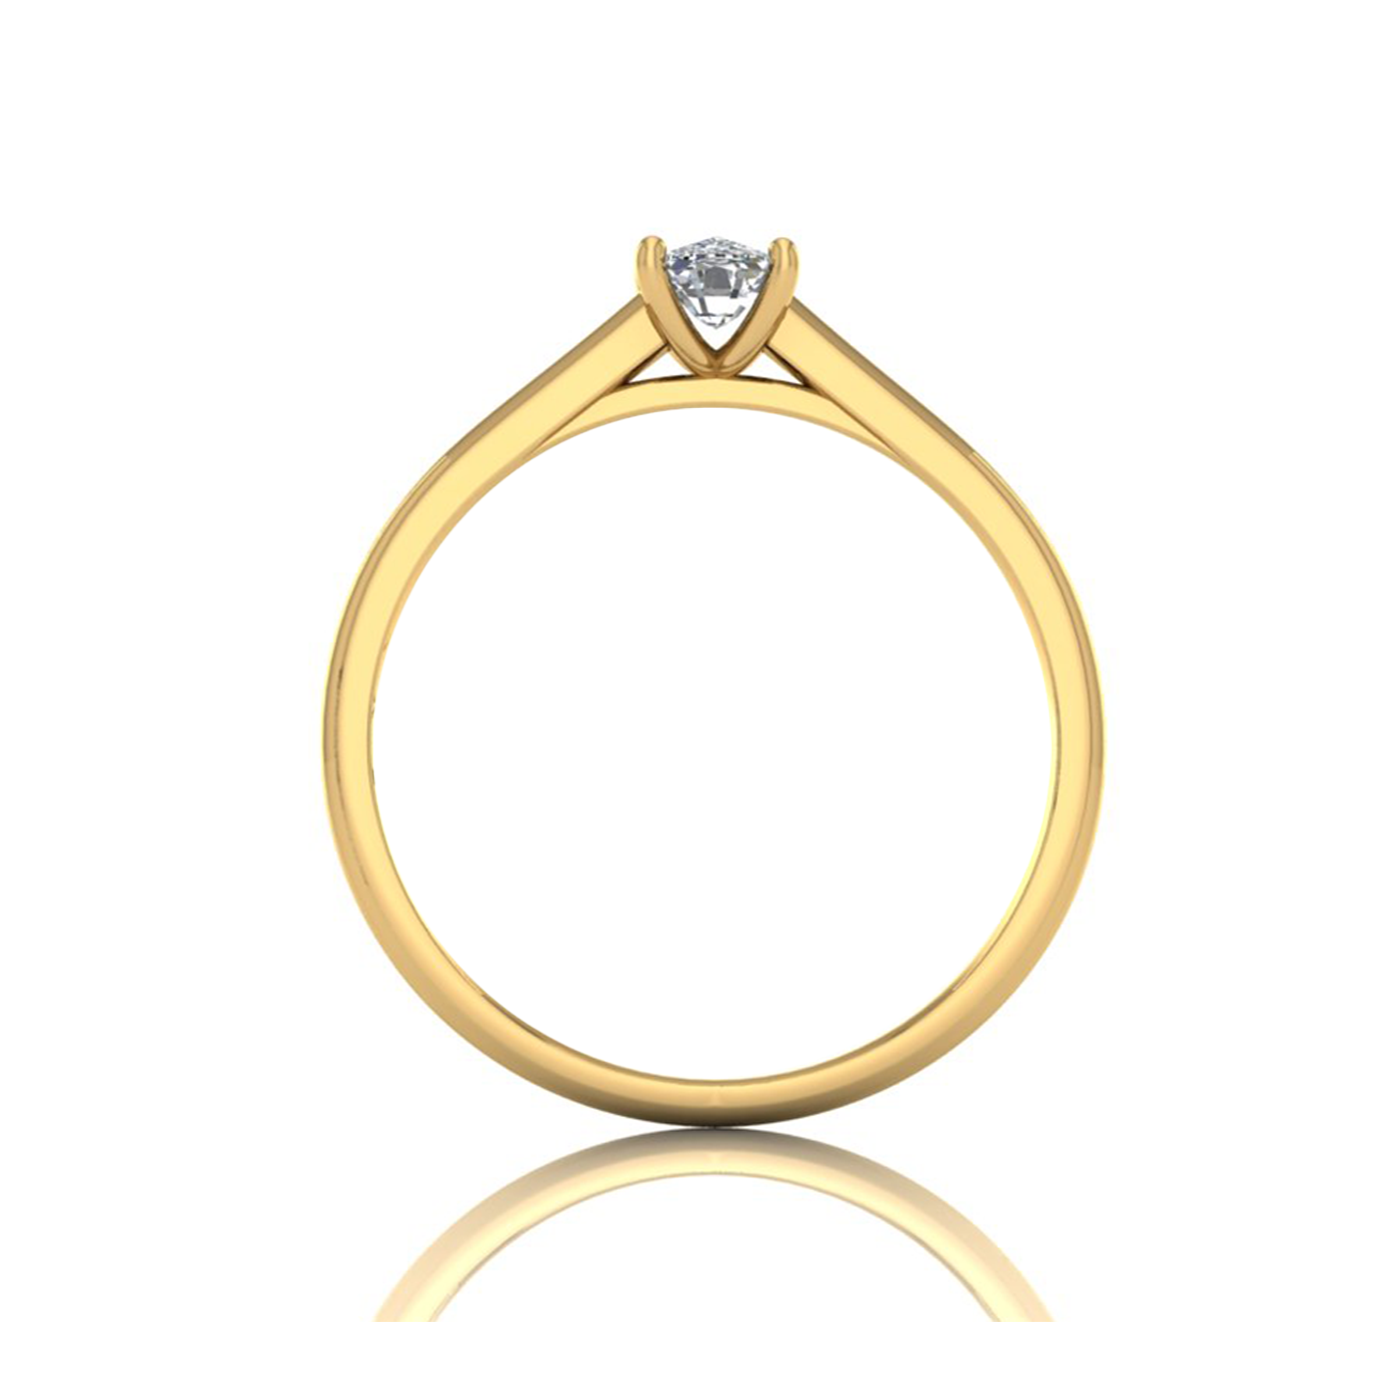 18k yellow gold  0,50 ct 4 prongs solitaire elongated cushion cut diamond engagement ring with whisper thin band